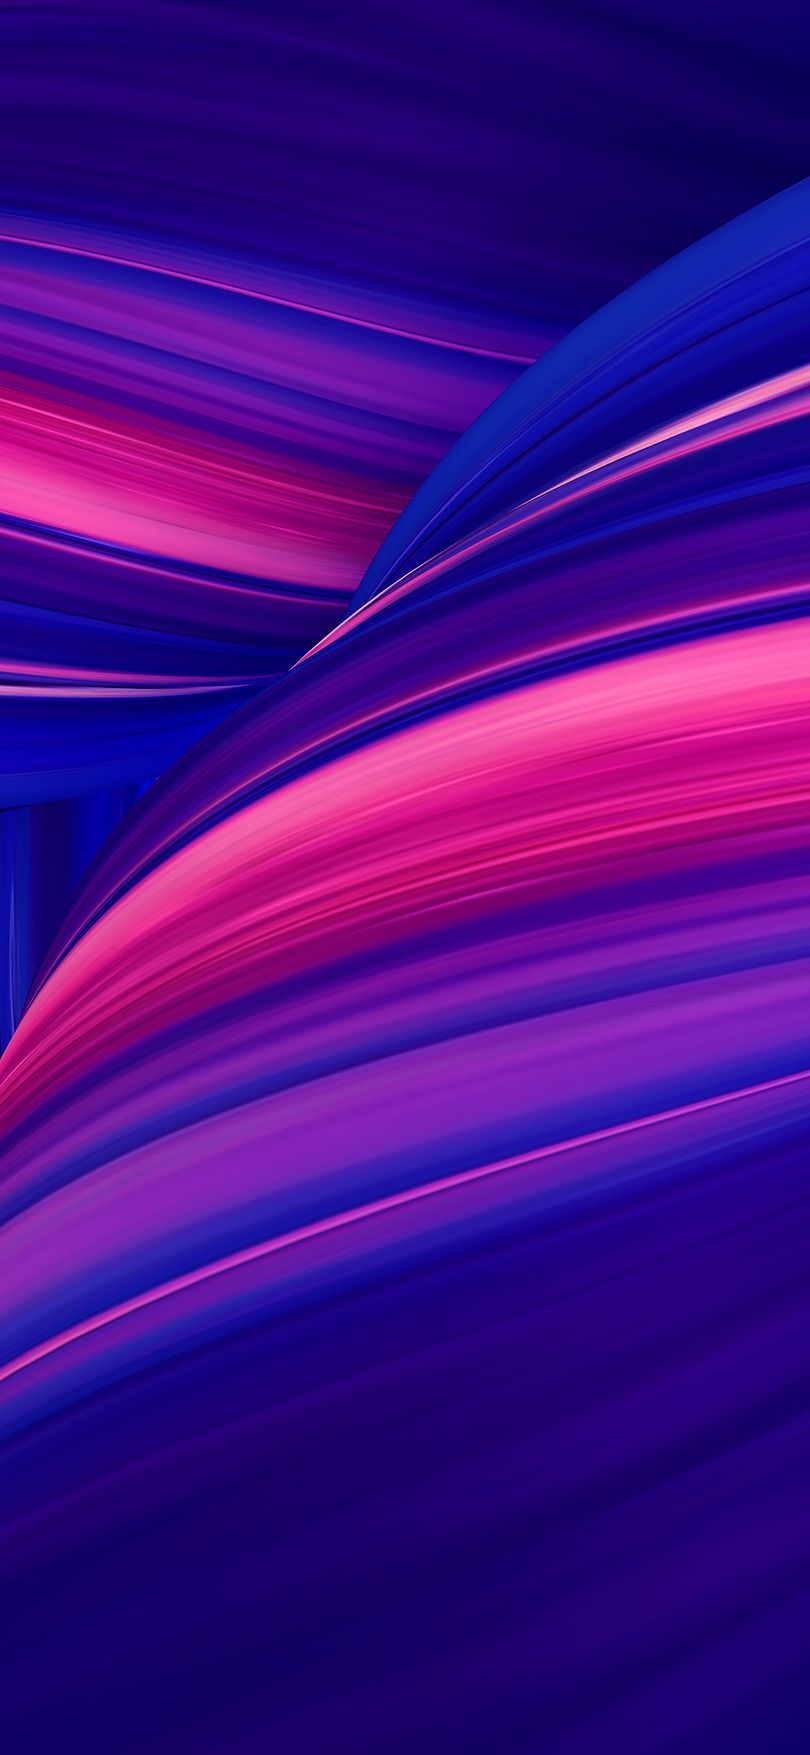 Free Download of Official OPPO R9s wallpaper in HD 1080x1920  Colorful  wallpaper Abstract Wallpaper downloads